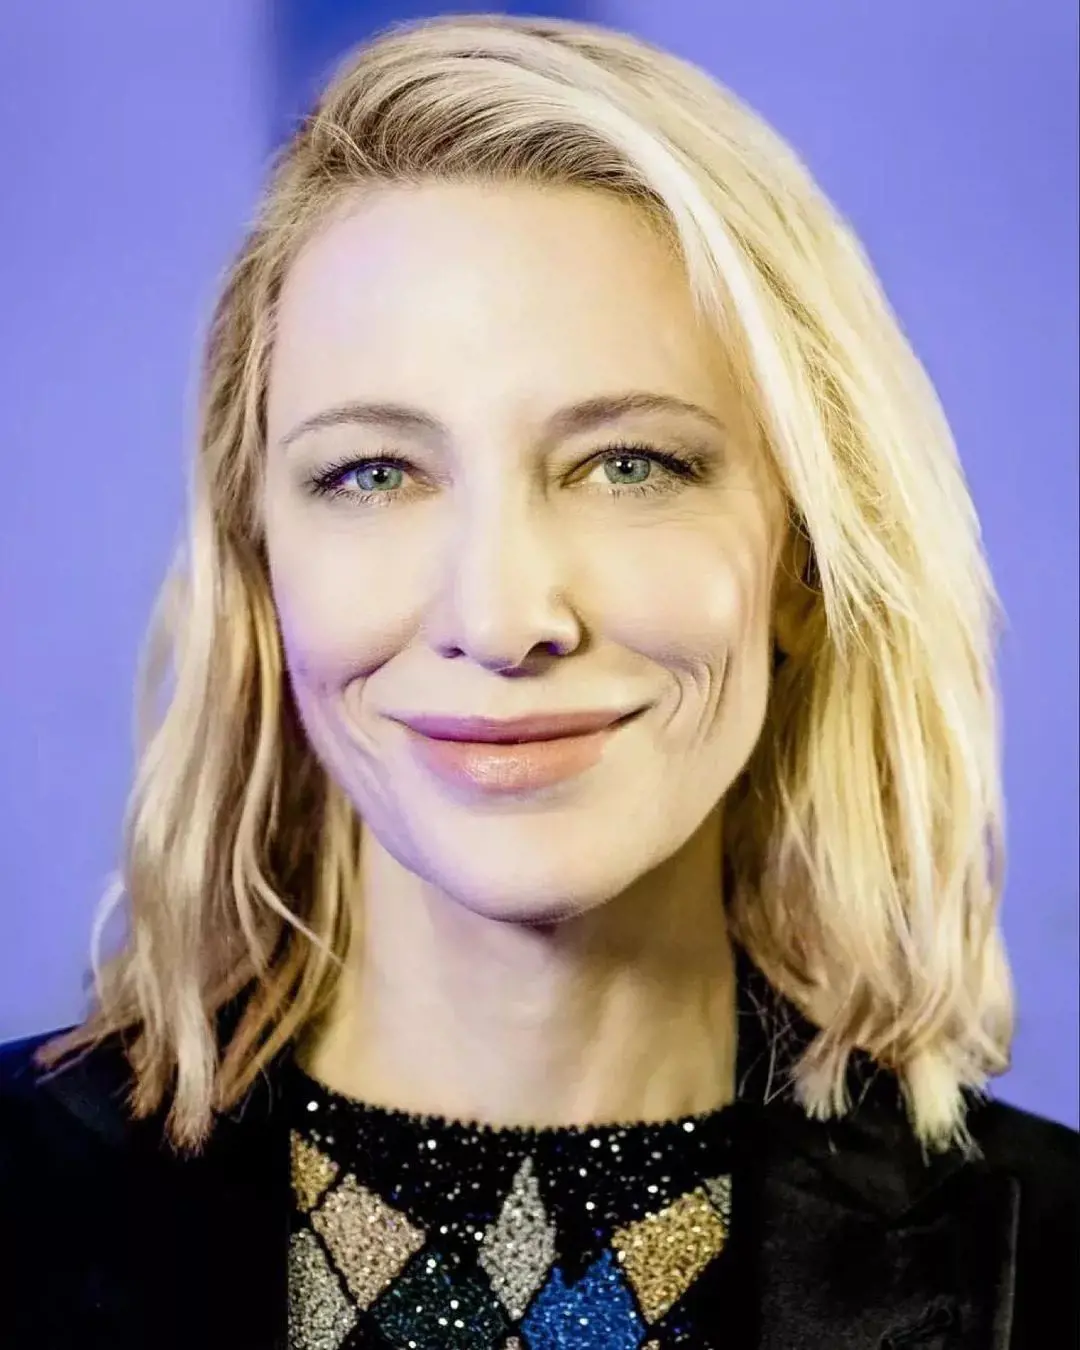 Cate smiling wearing makeup by Mary Greenwell for WDR (Photo Credit: Thomas Kierok)